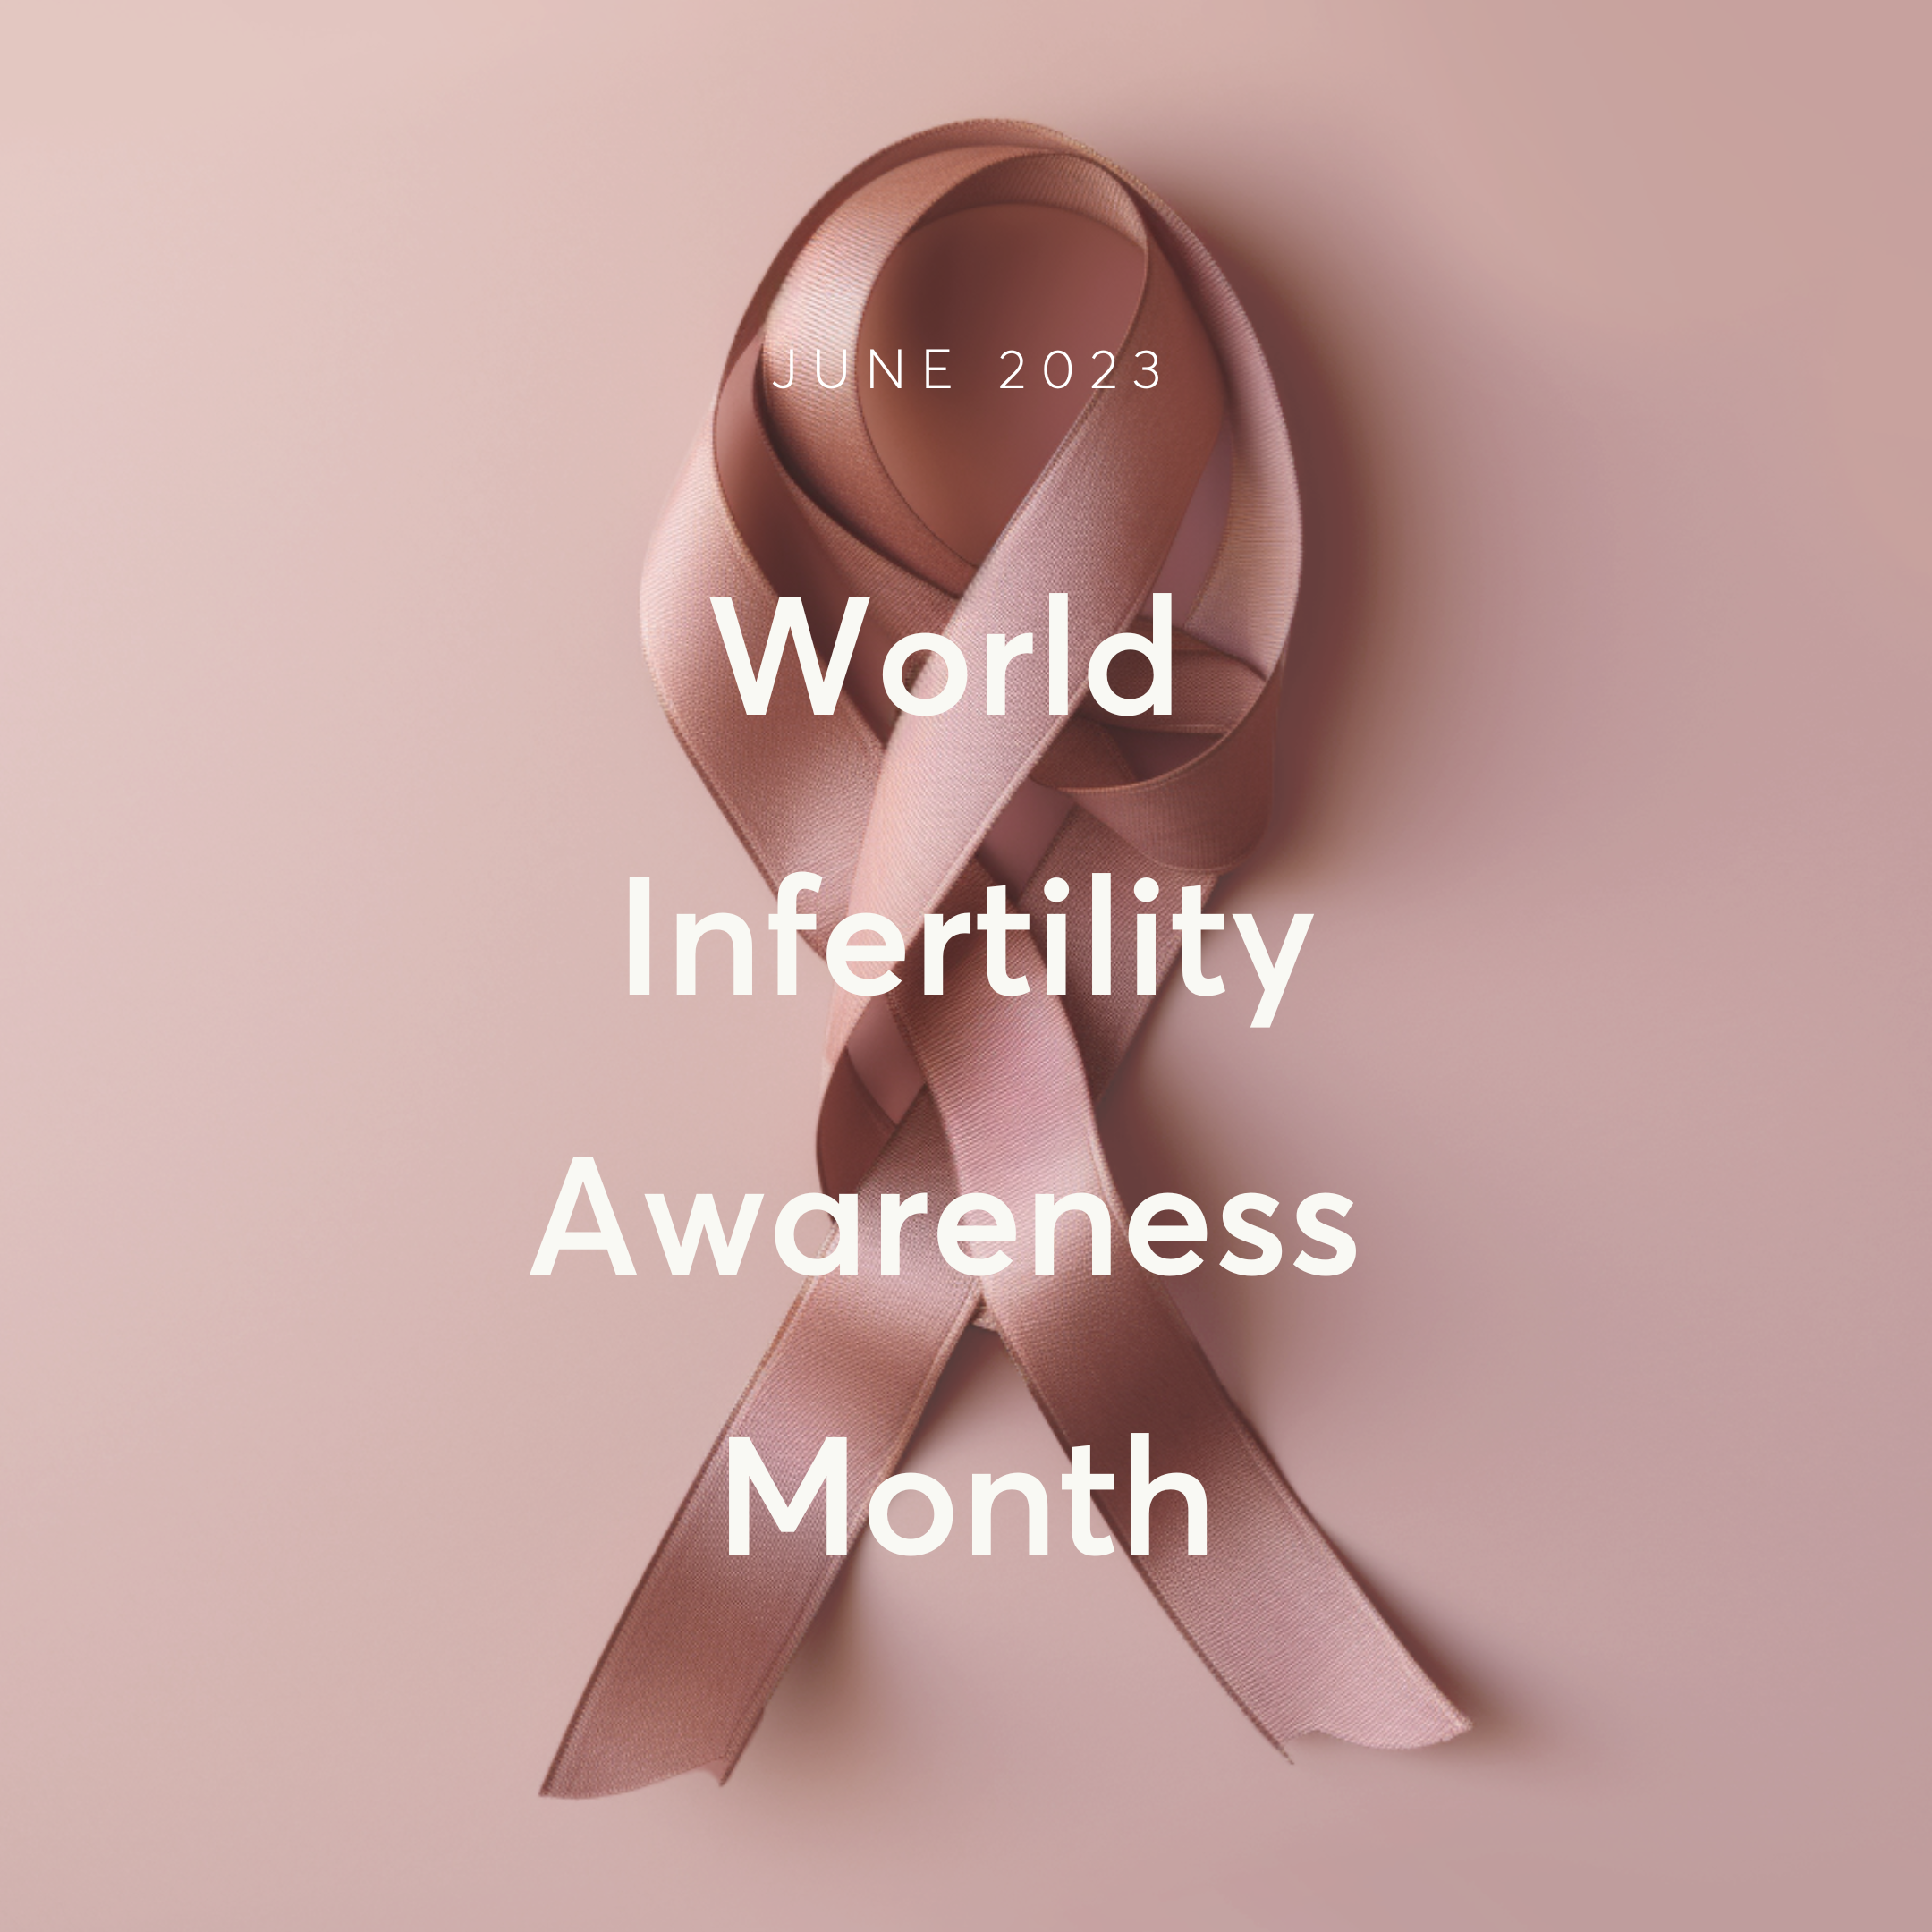 Join Naître in Supporting World Infertility Awareness Month